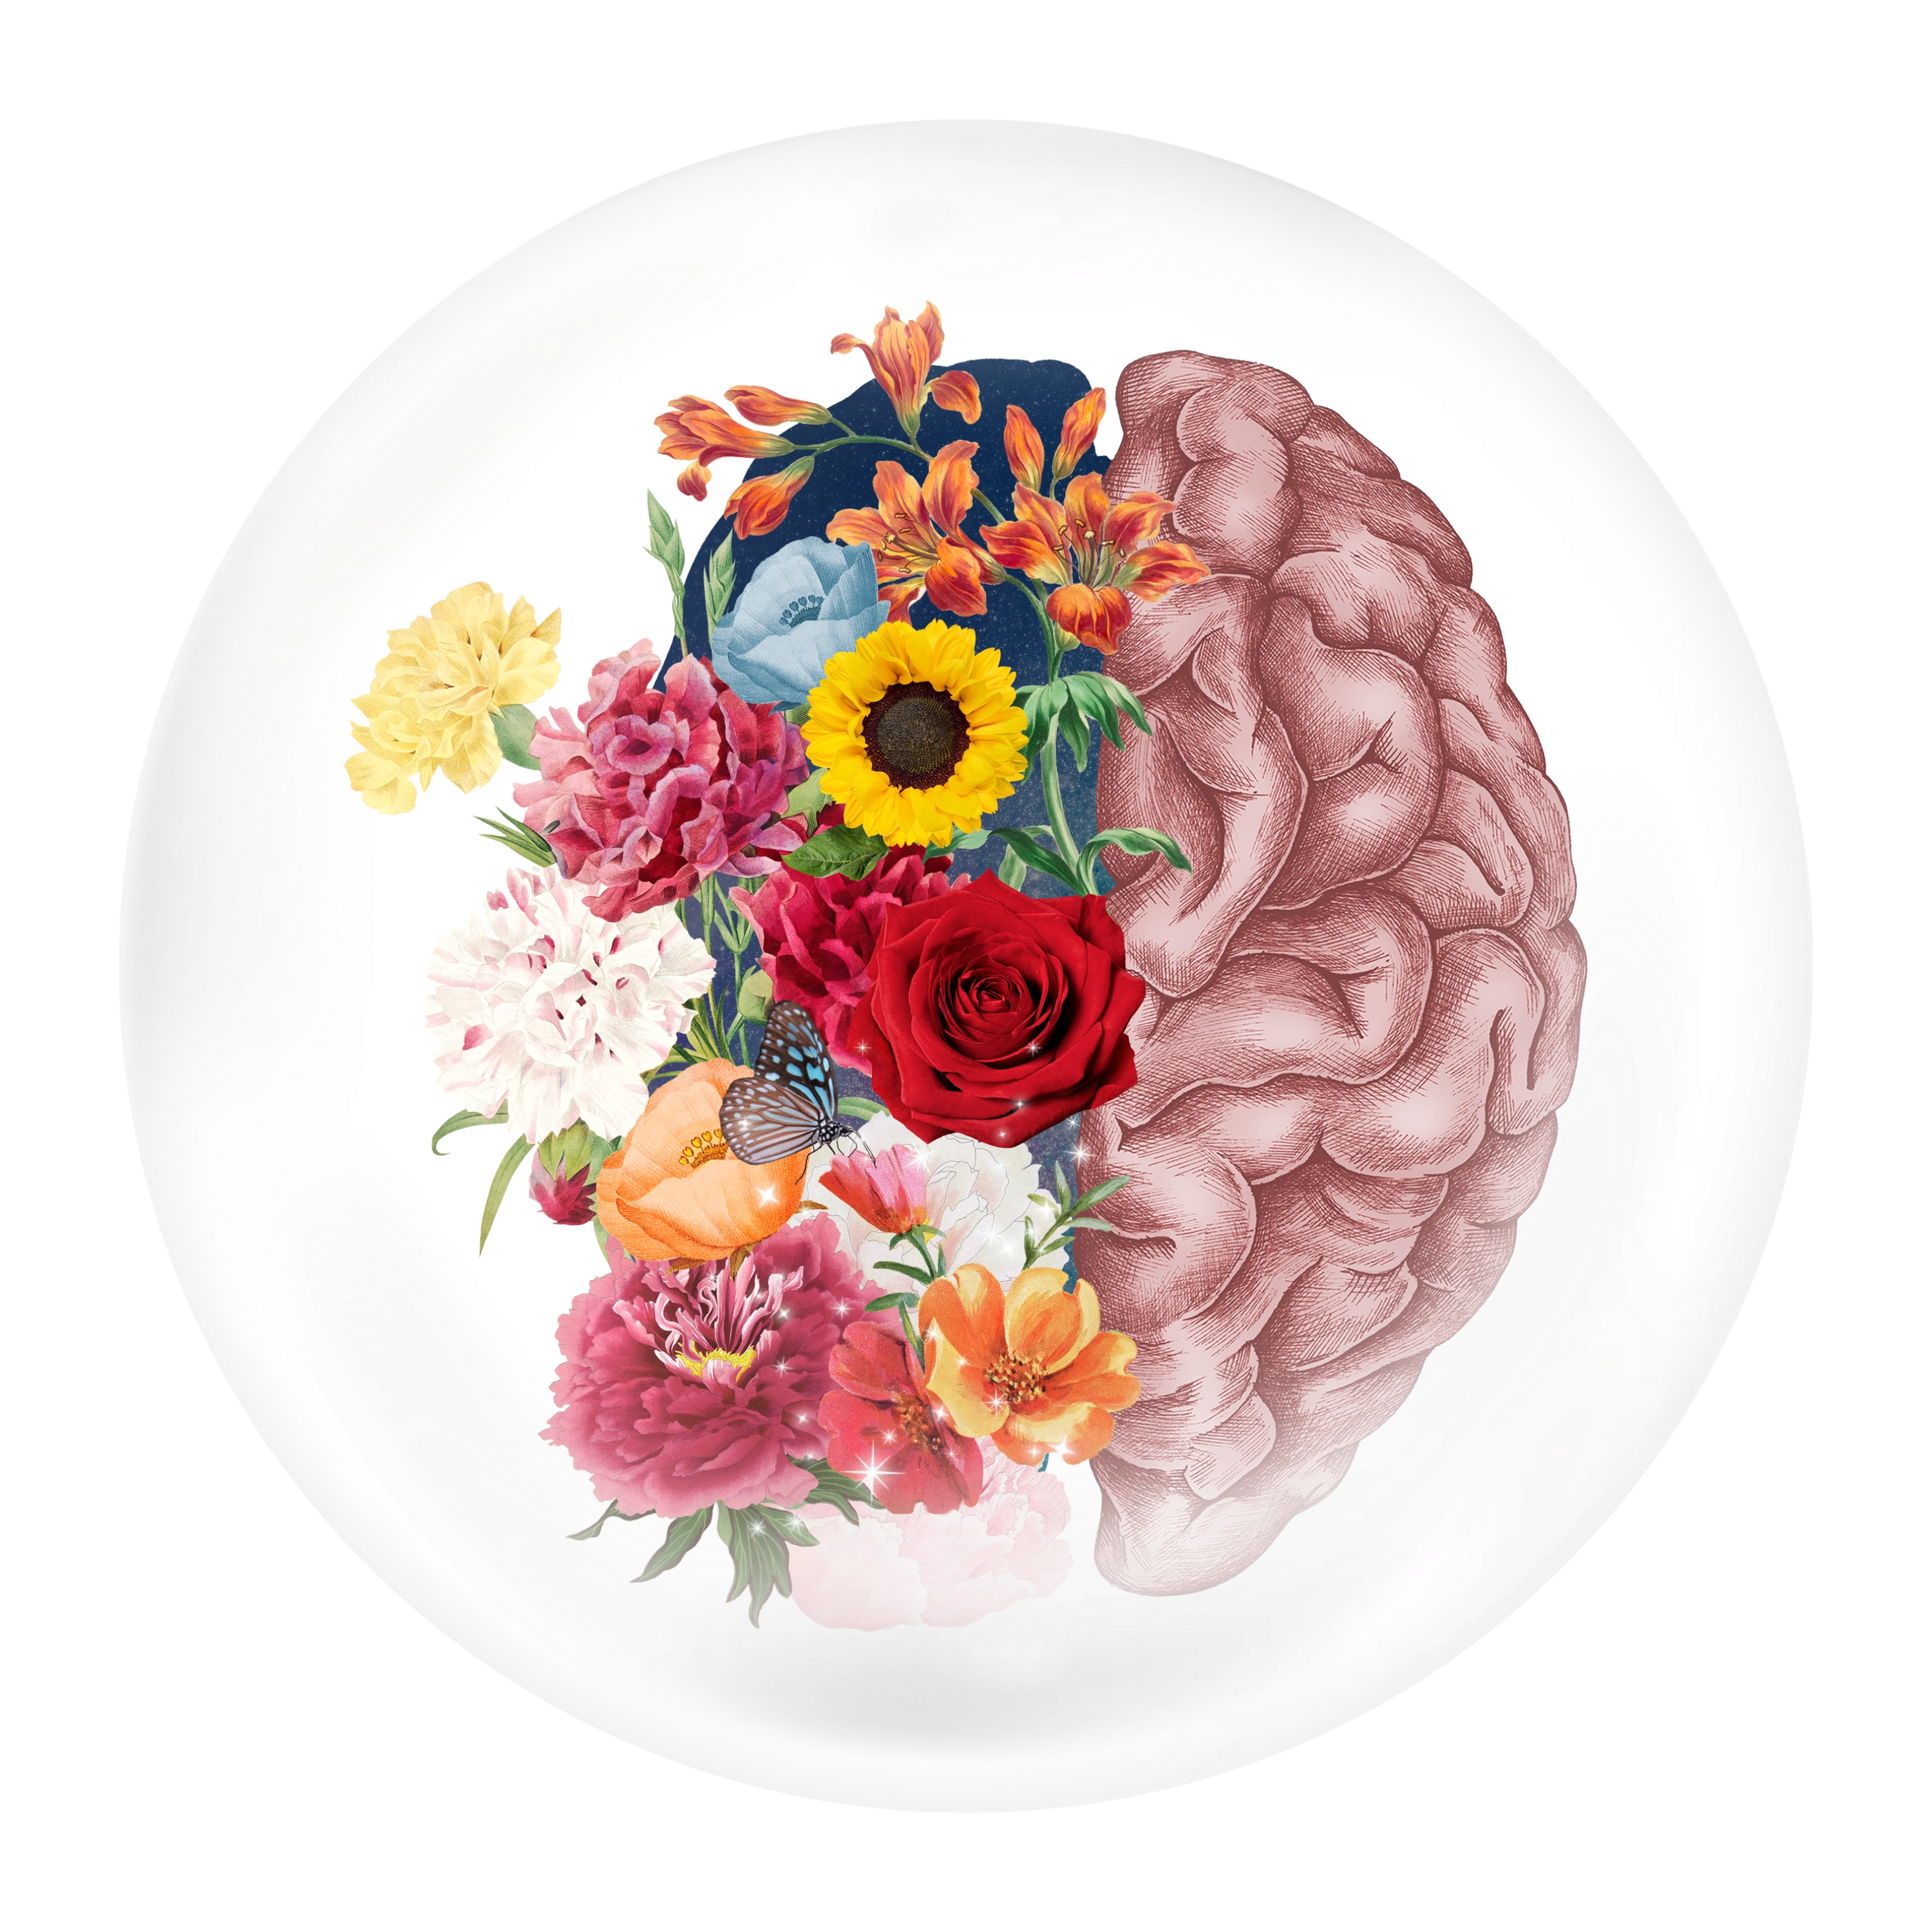 best home school online-picture of brain that has flowers on one side and the brain on the other, showing growth in learning